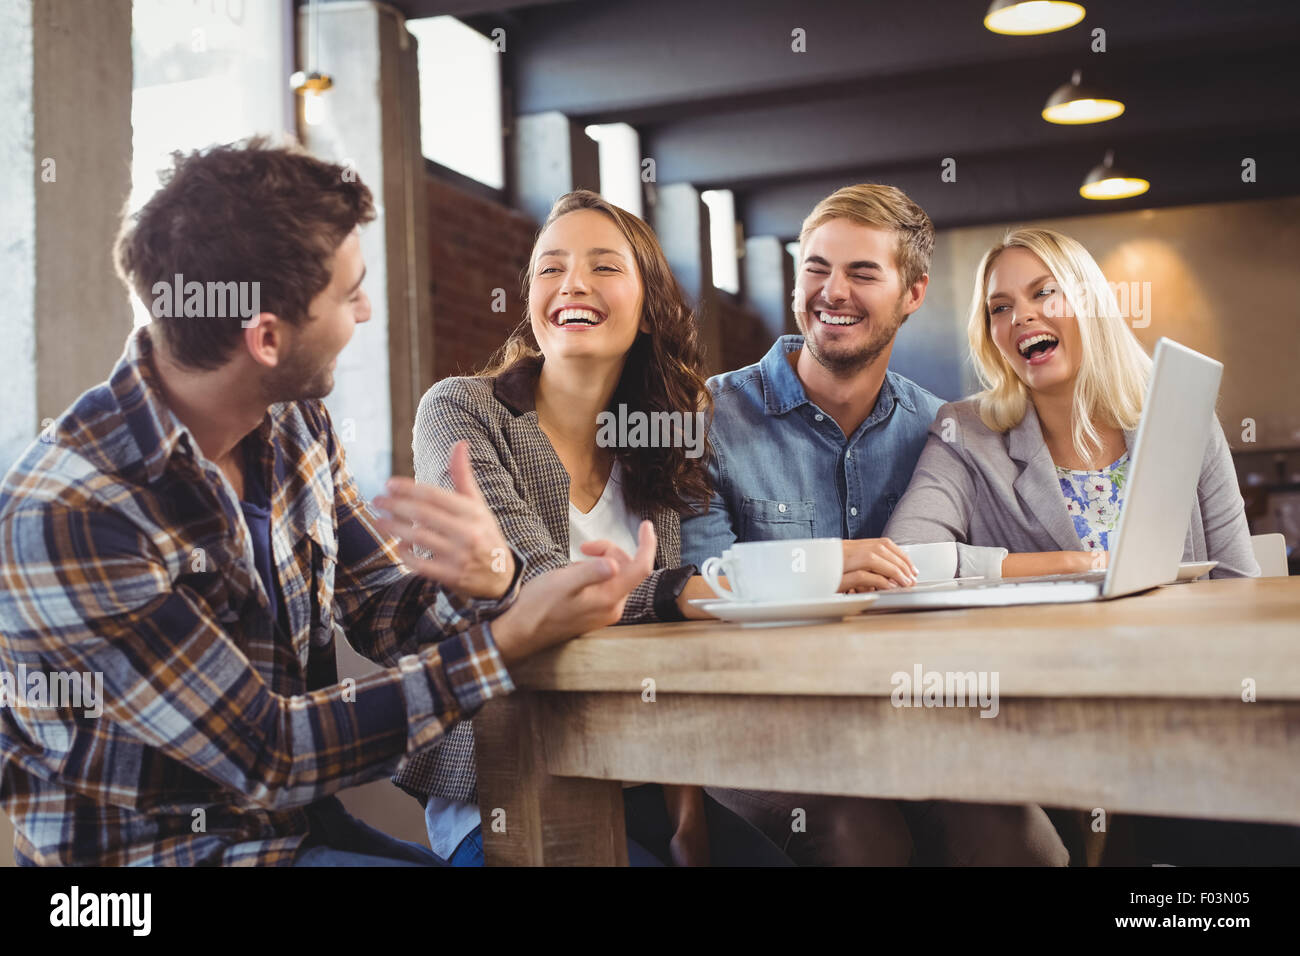 Smiling friends drinking coffee and laughing Stock Photo